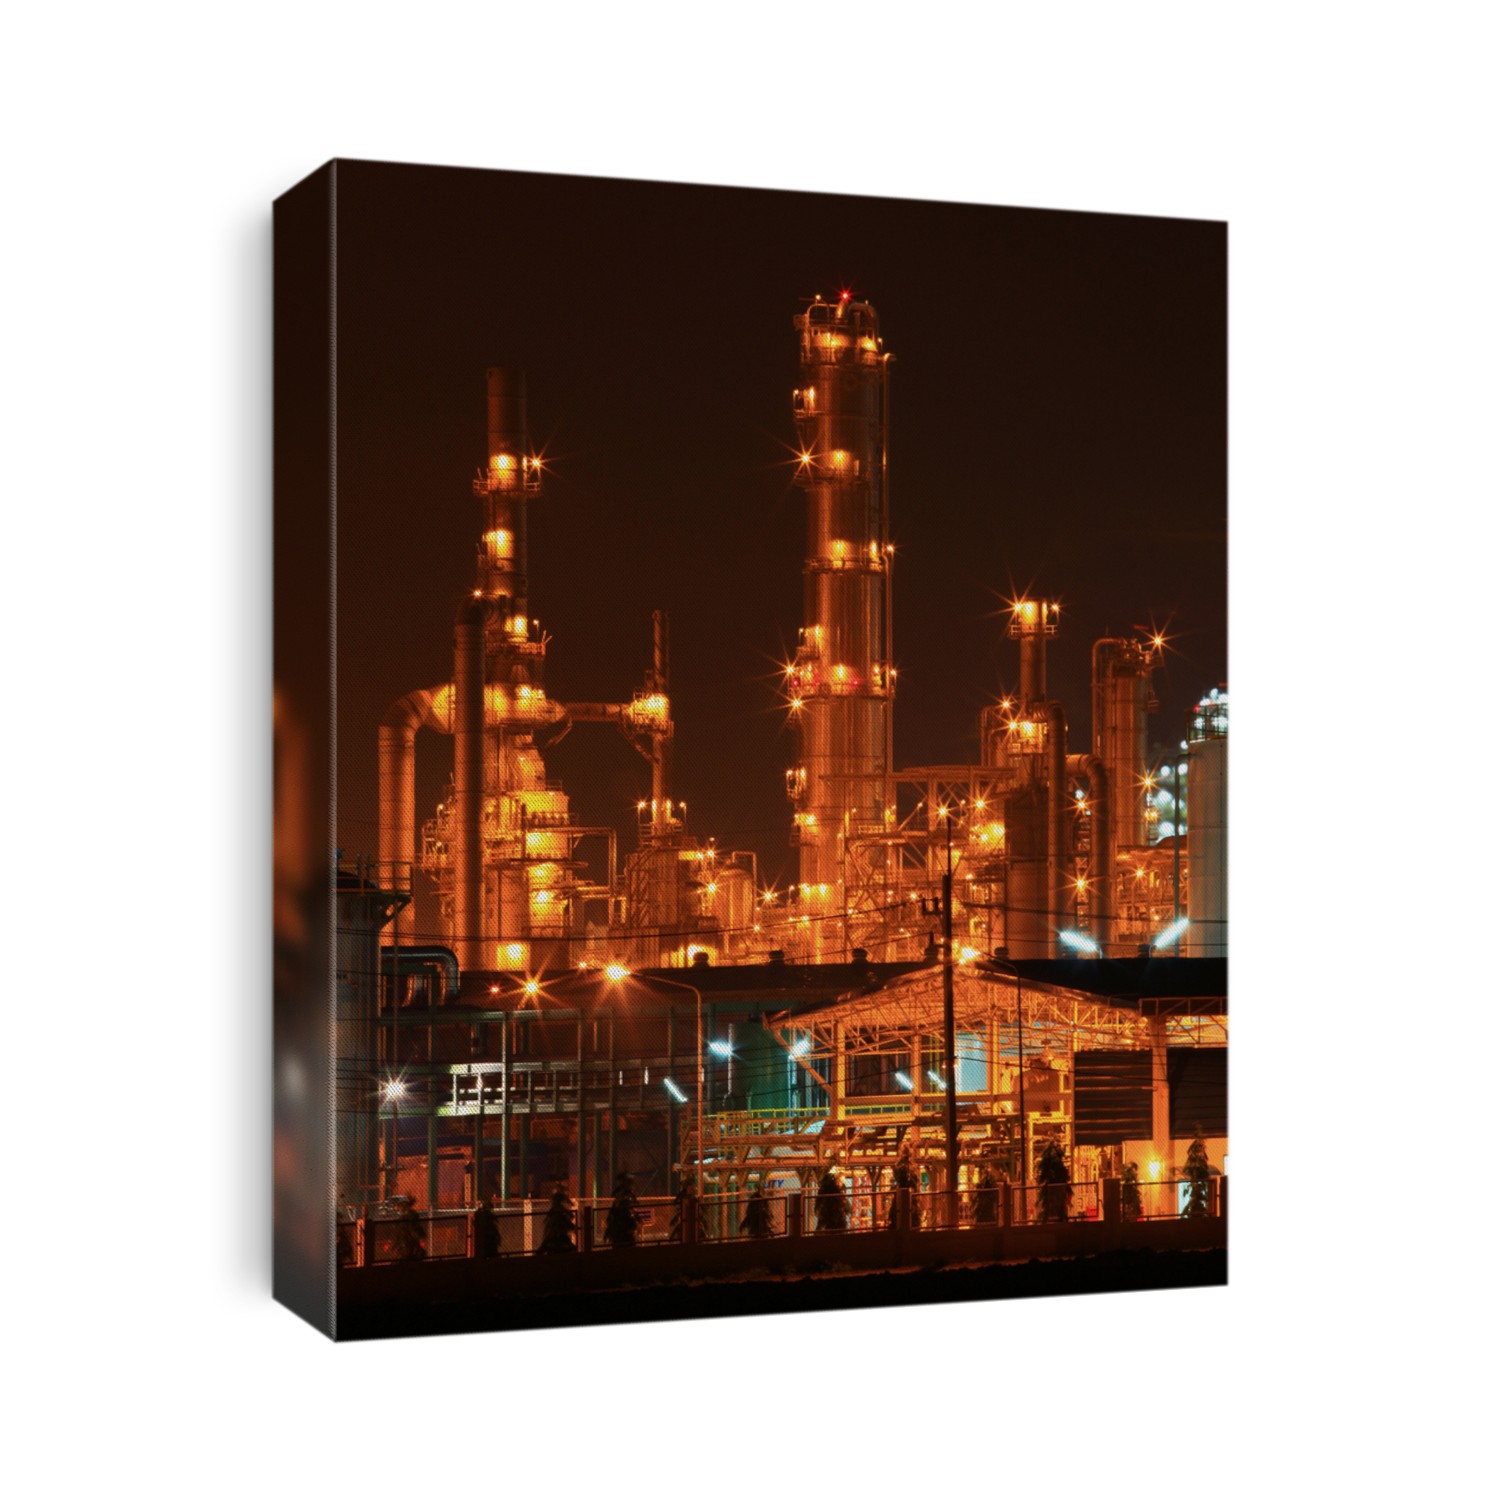 closeup of petrochemical oil refinery factory pipeline at night